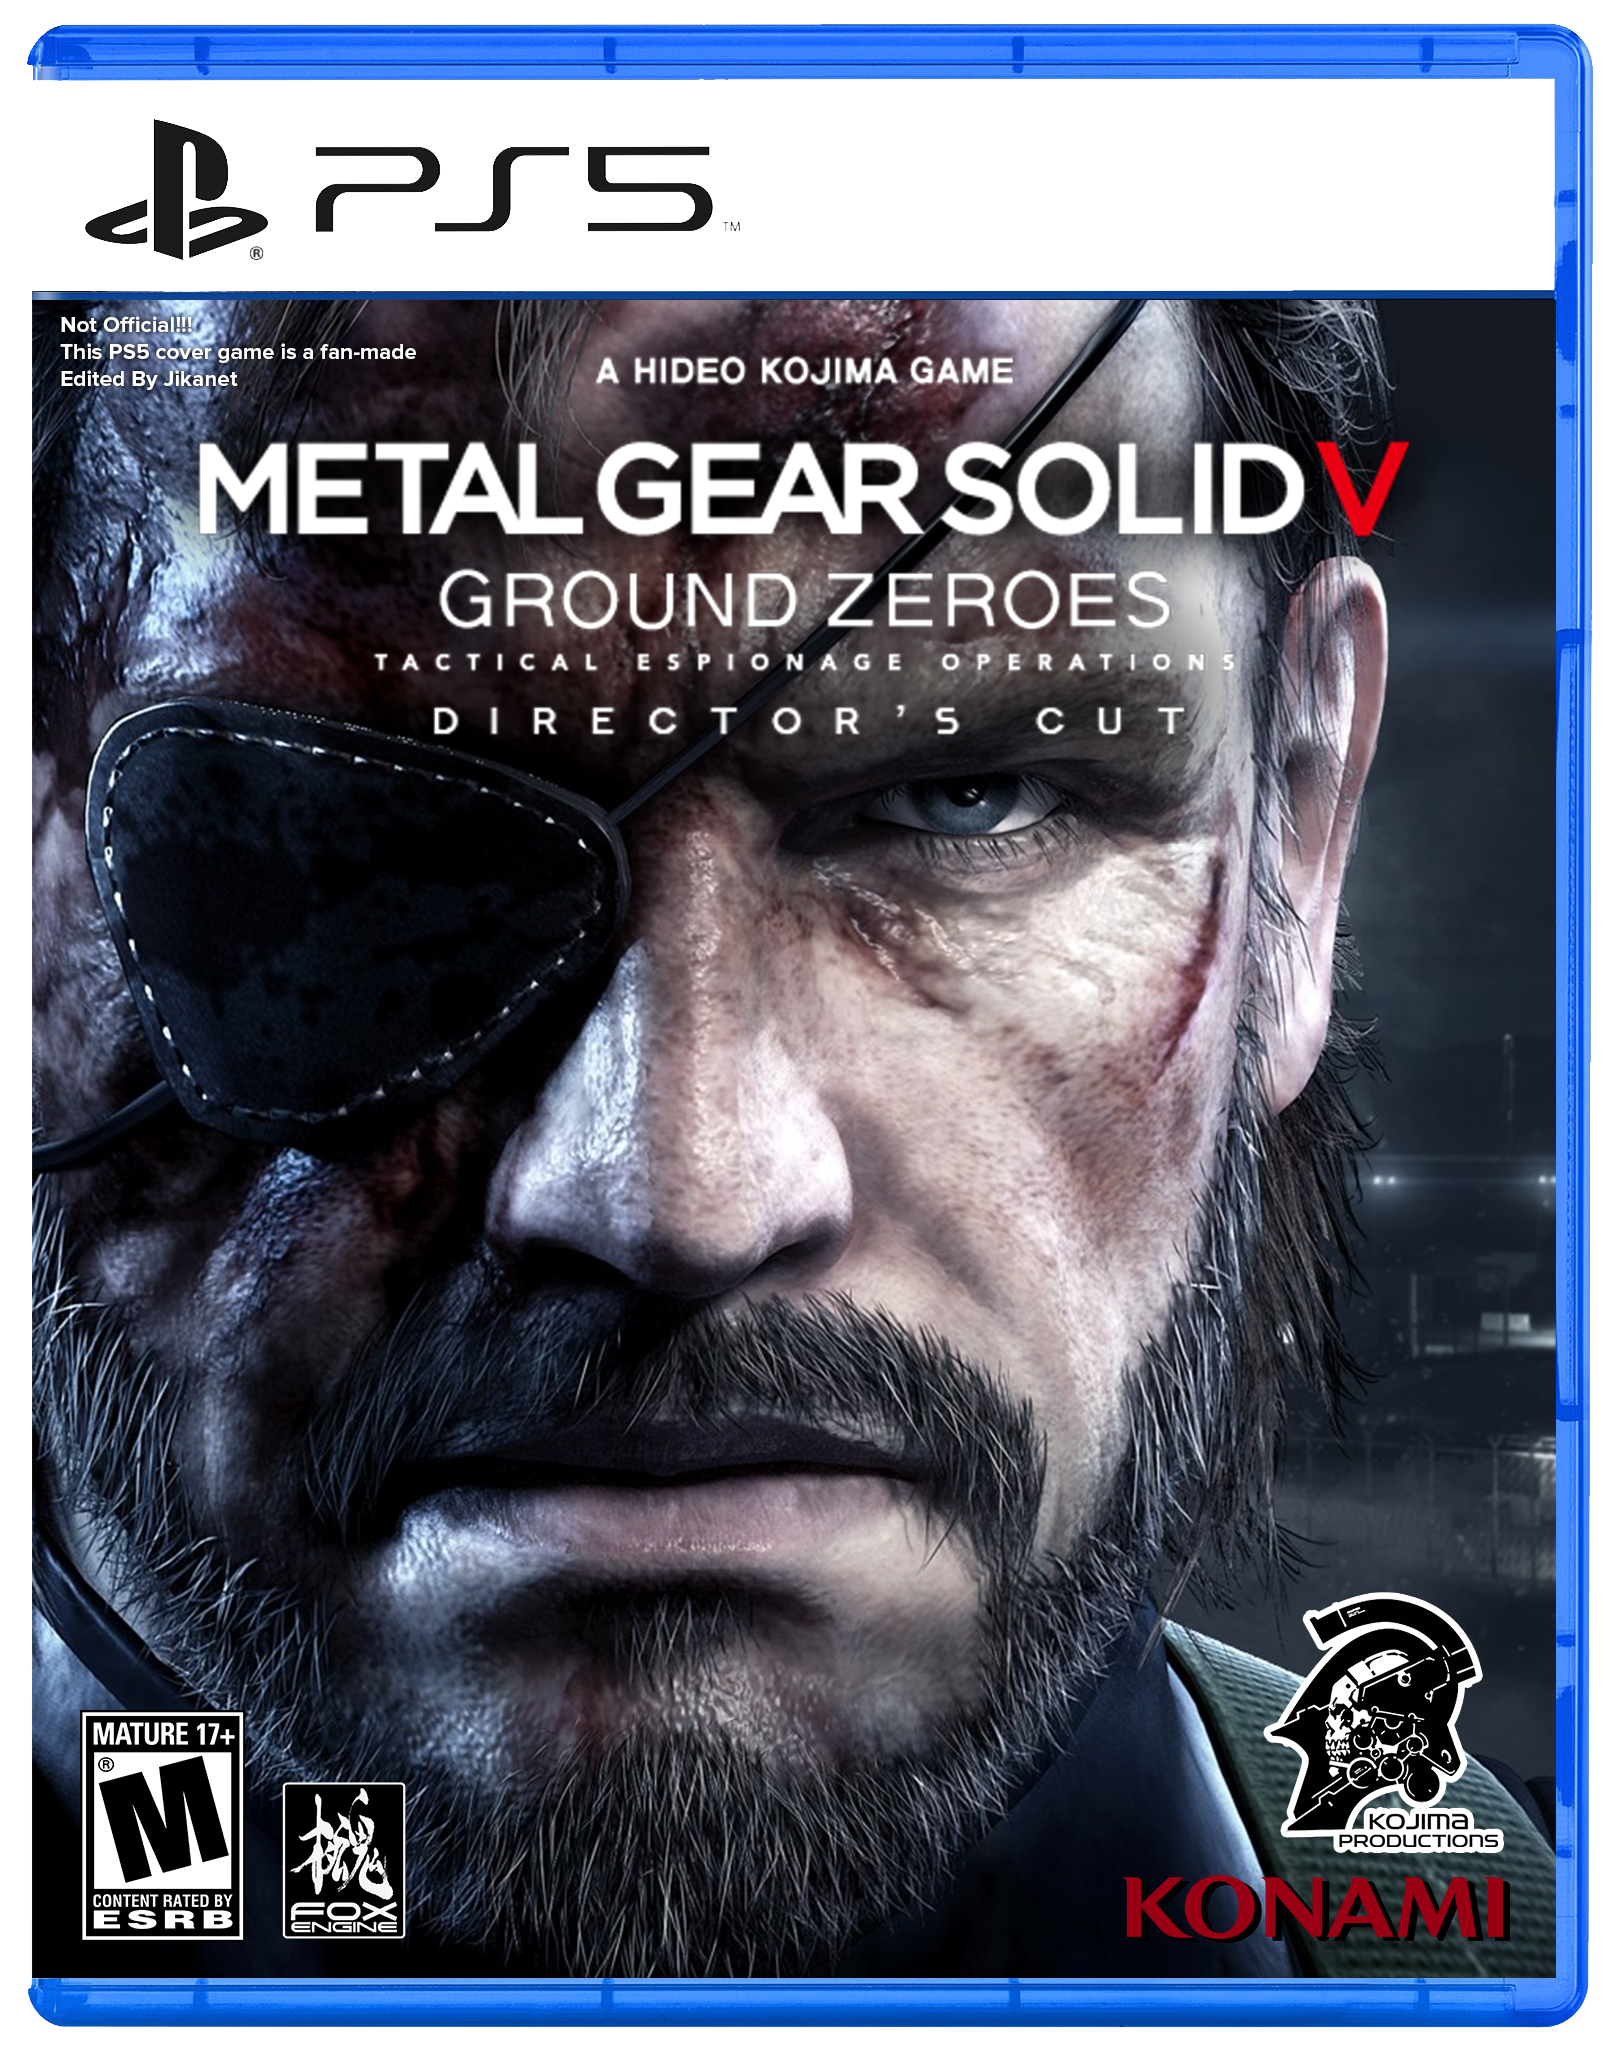 Metal Gear Solid V: Ground Zeroes -Director's Cut- | Game Ideas